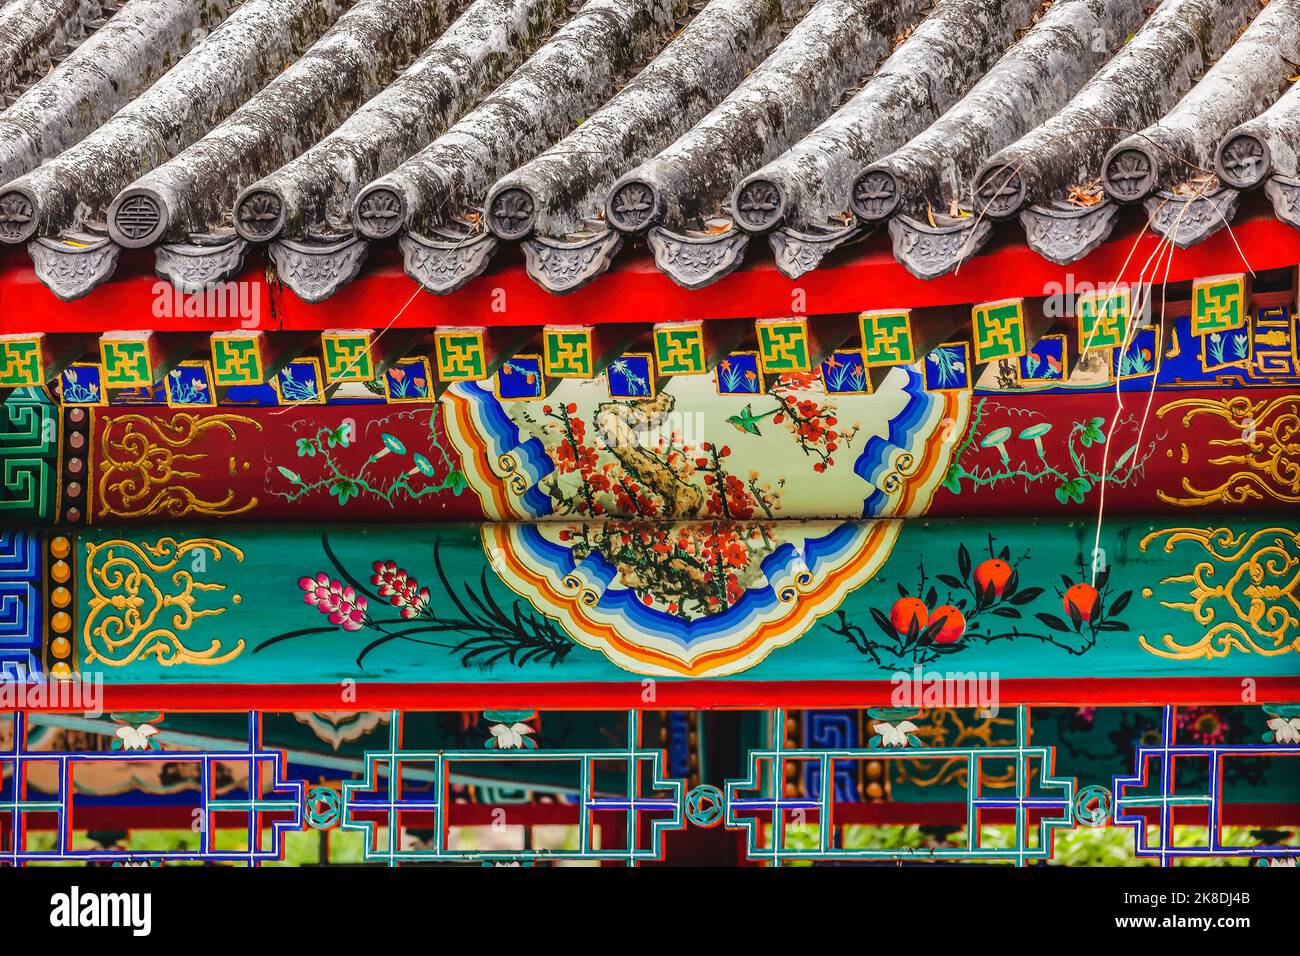 Colorful Ornate Red Pavilion Decorations  Temple of Sun Ritan City Park Beijing China Stock Photo